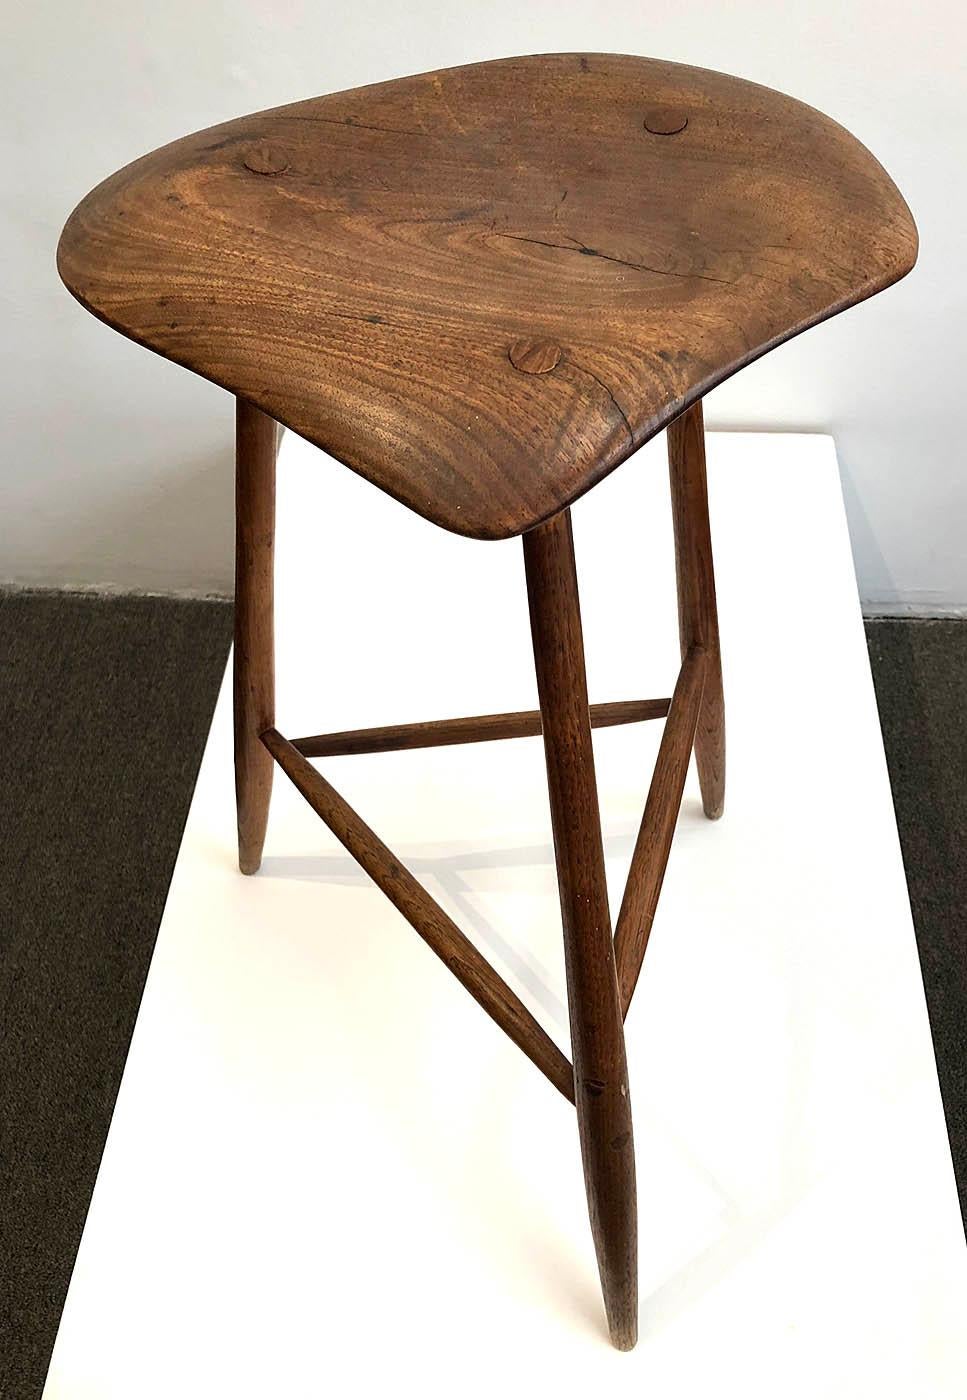 American Craftsman Wharton Esherick Wooden Stool Signed and Dated